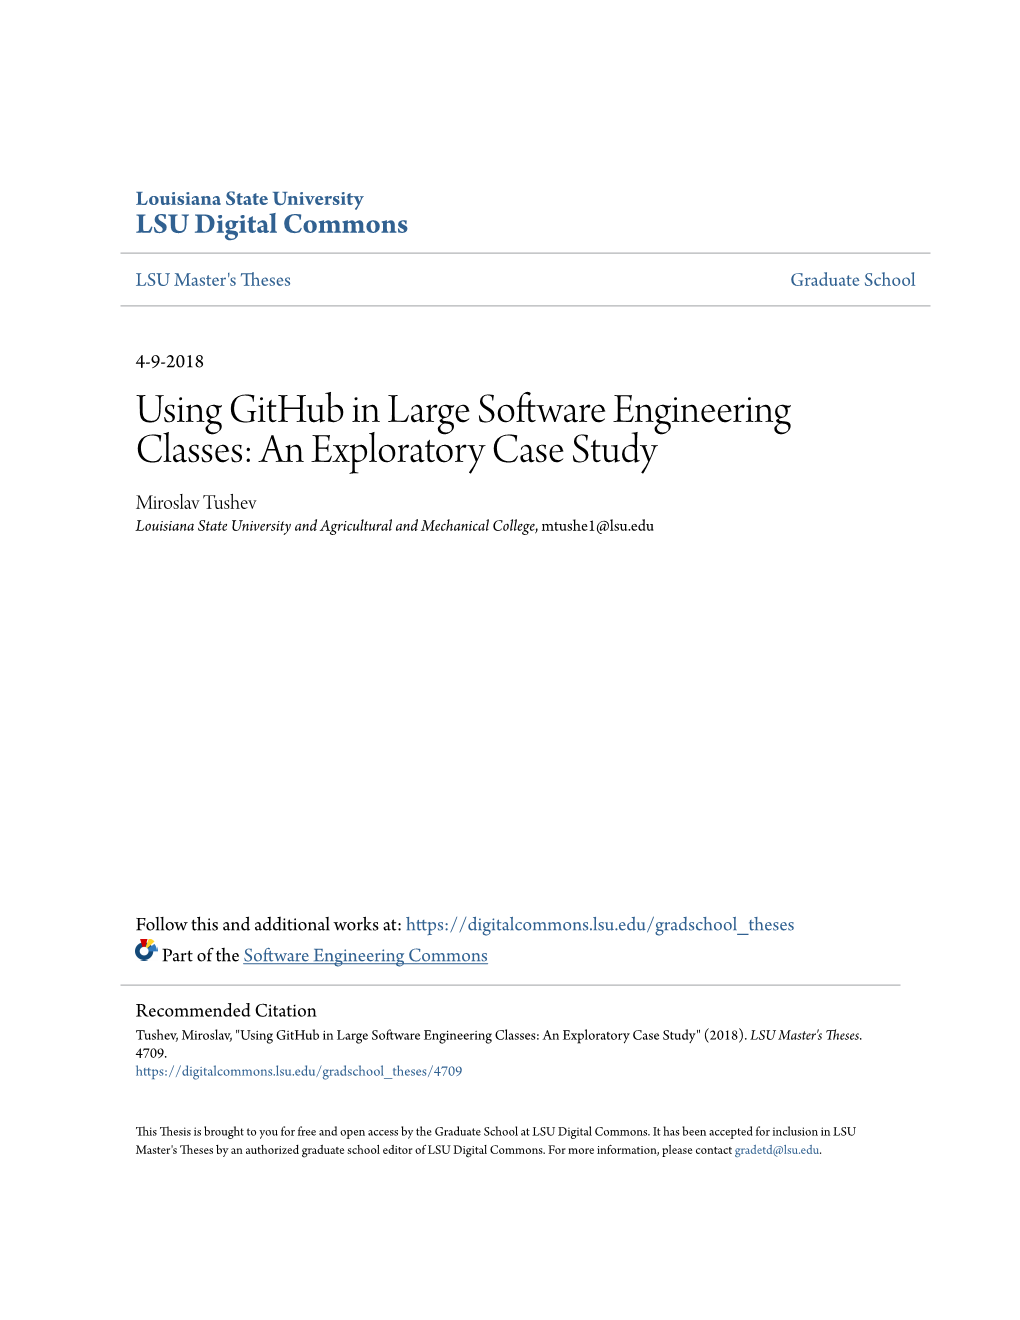 Using Github in Large Software Engineering Classes